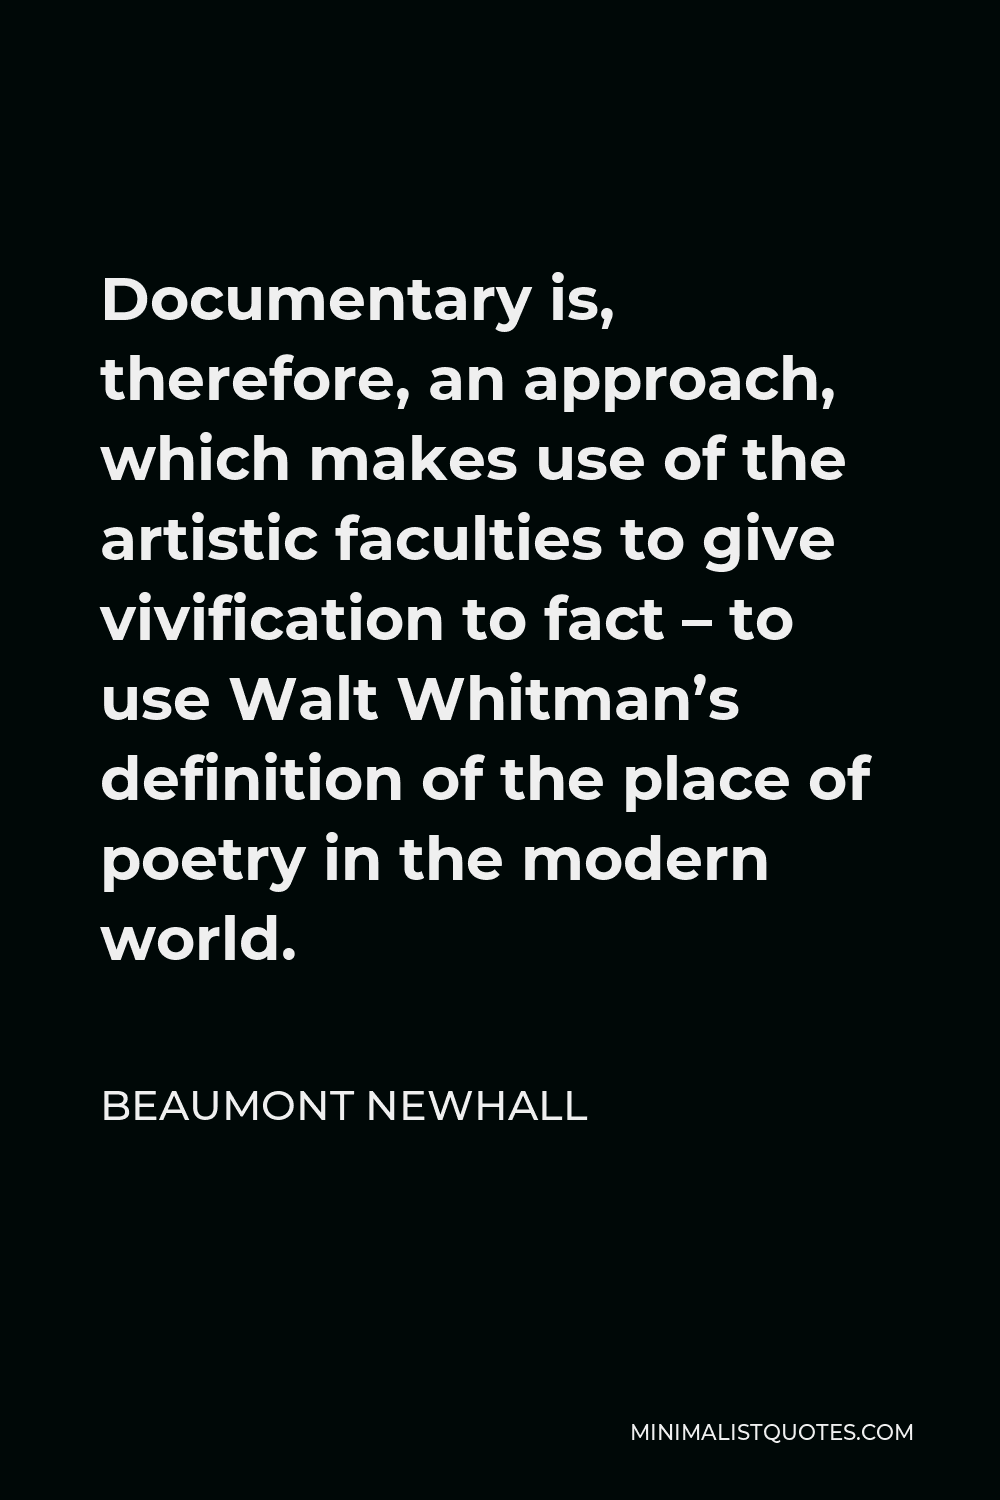 Beaumont Newhall Quote - Documentary is, therefore, an approach, which makes use of the artistic faculties to give vivification to fact – to use Walt Whitman’s definition of the place of poetry in the modern world.